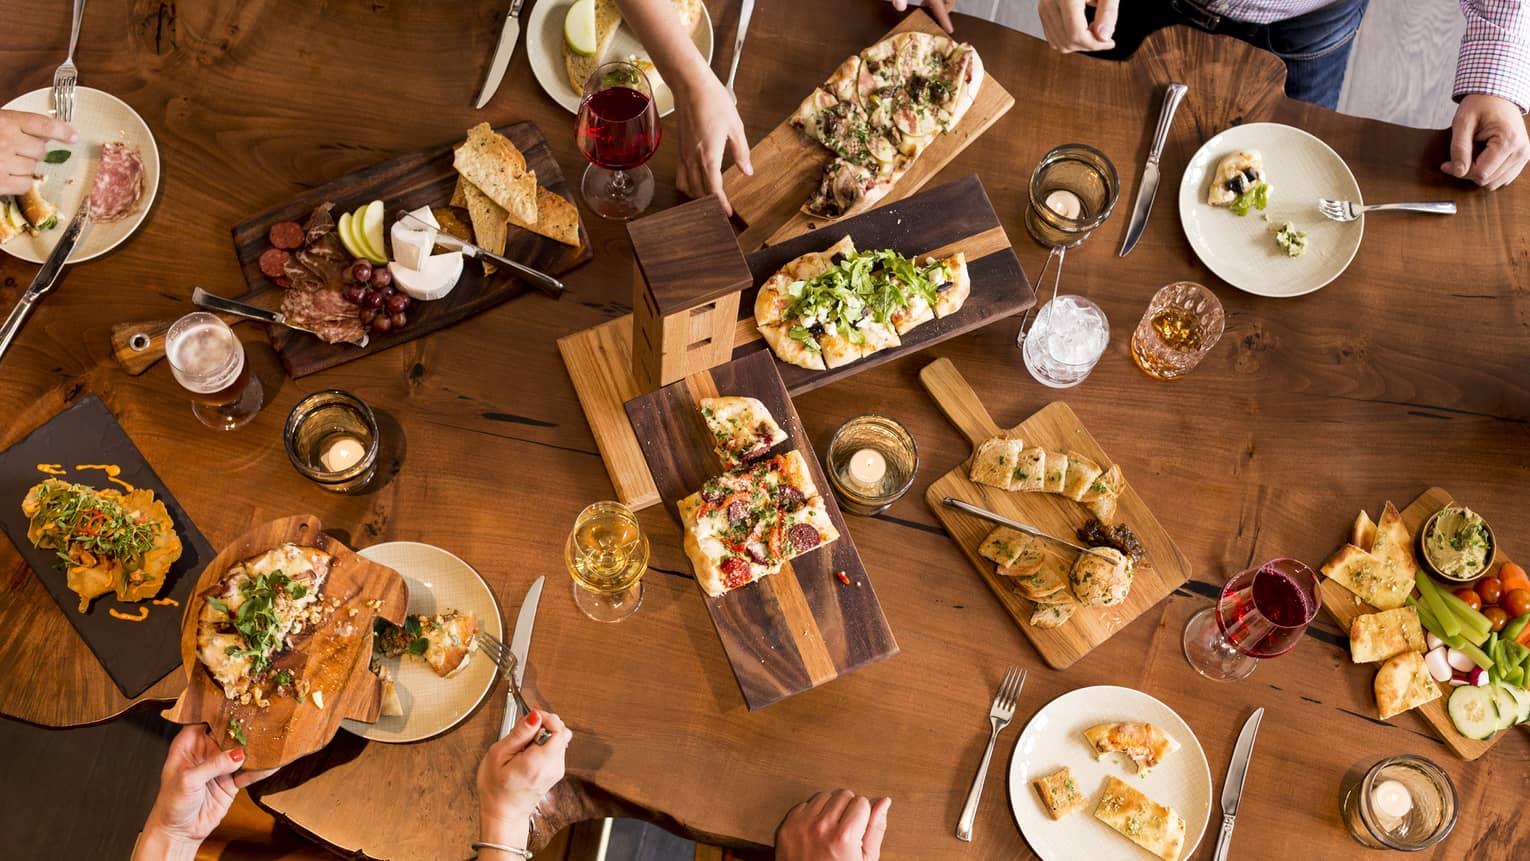 Aerial view of people dining around rustic wood table with platters of flatbreads, appetizers